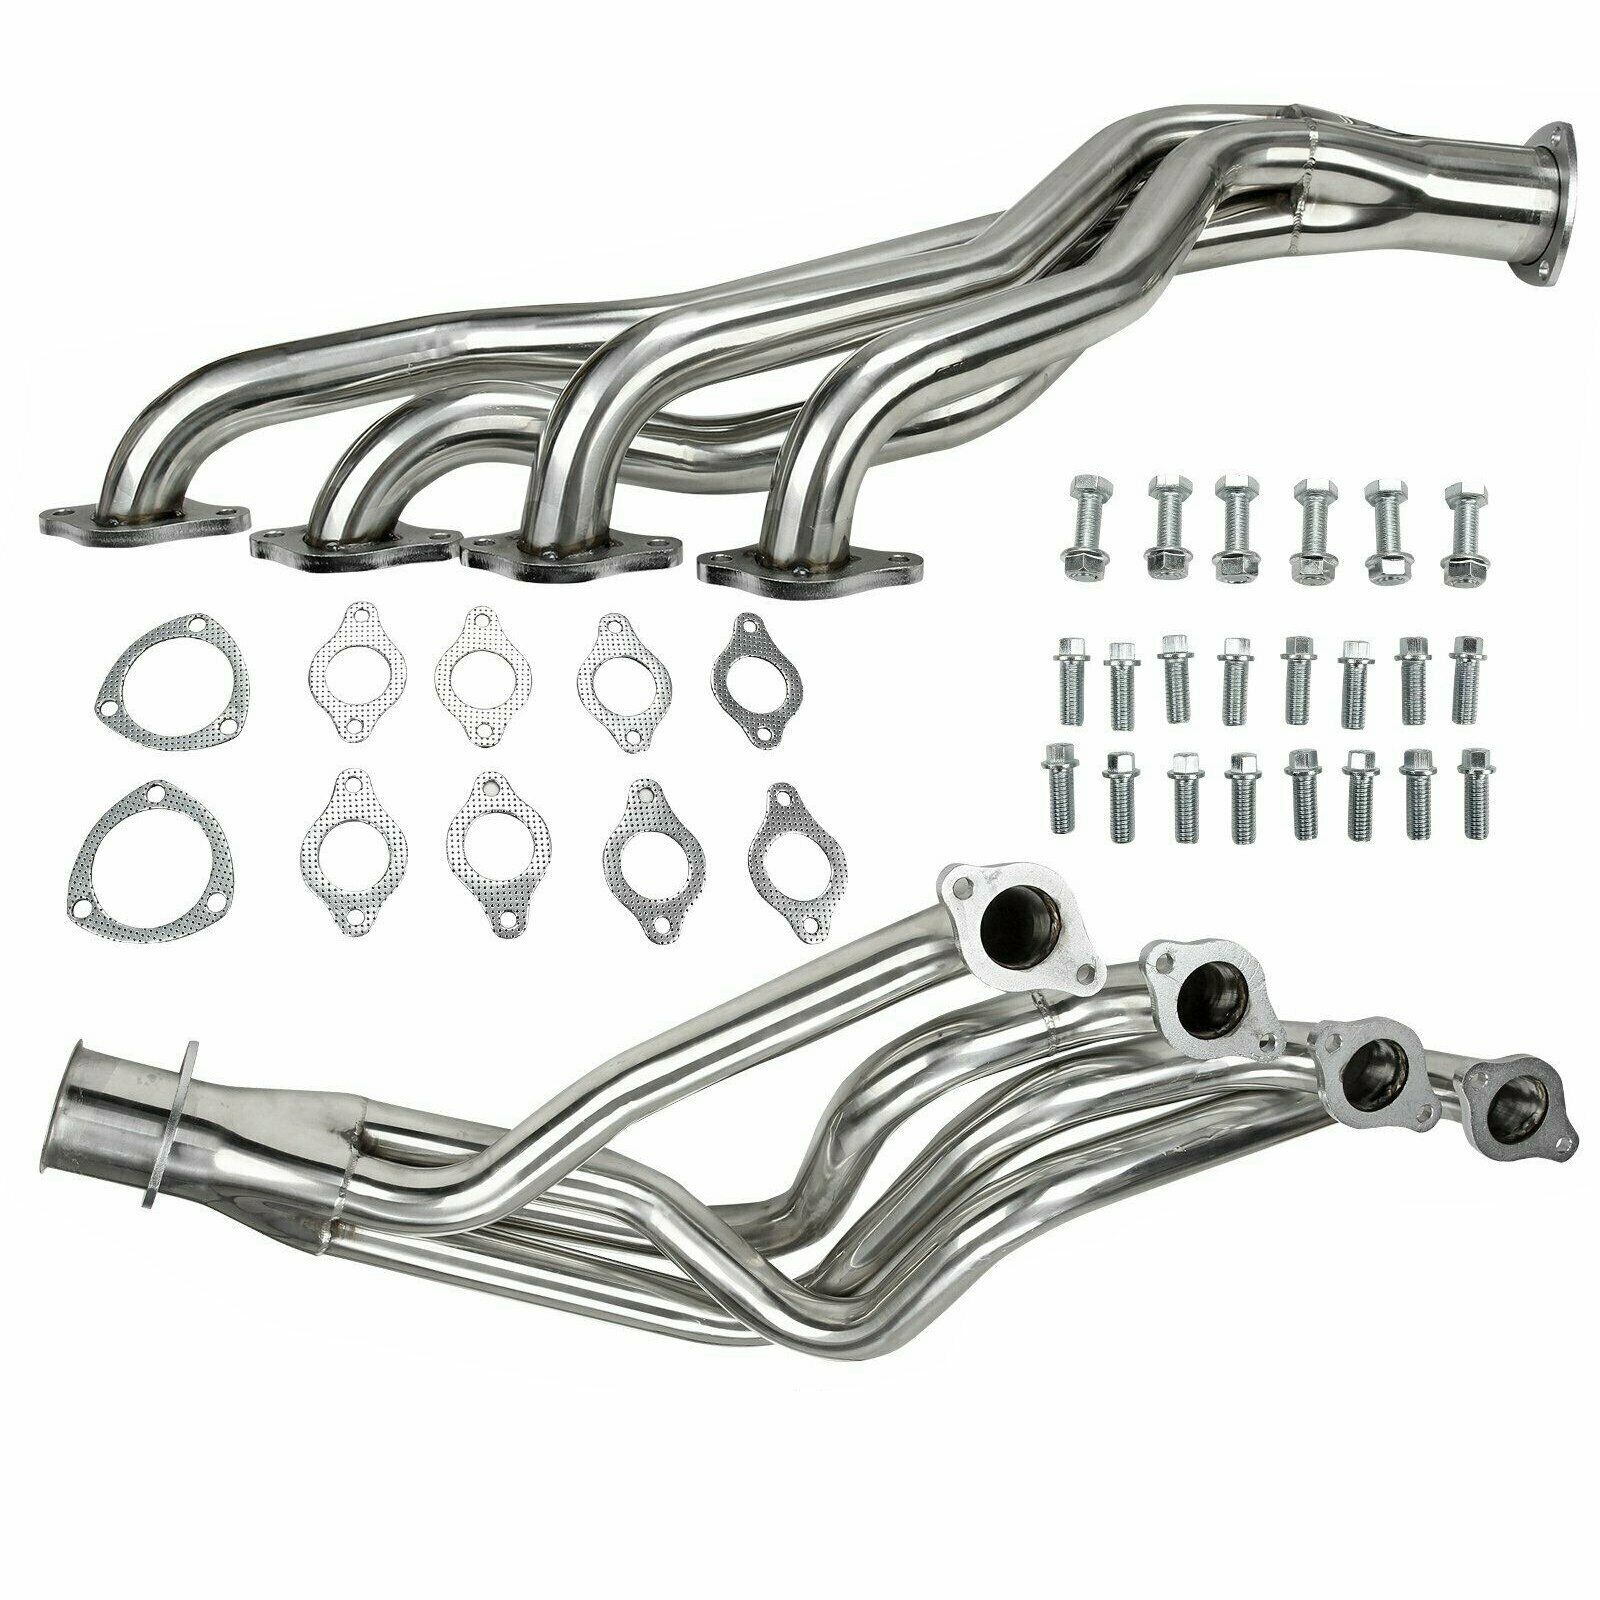 Chevelle Camaro Heavy Duty Headers Silver coated Fits 68-72 BBC Chevy 396 427